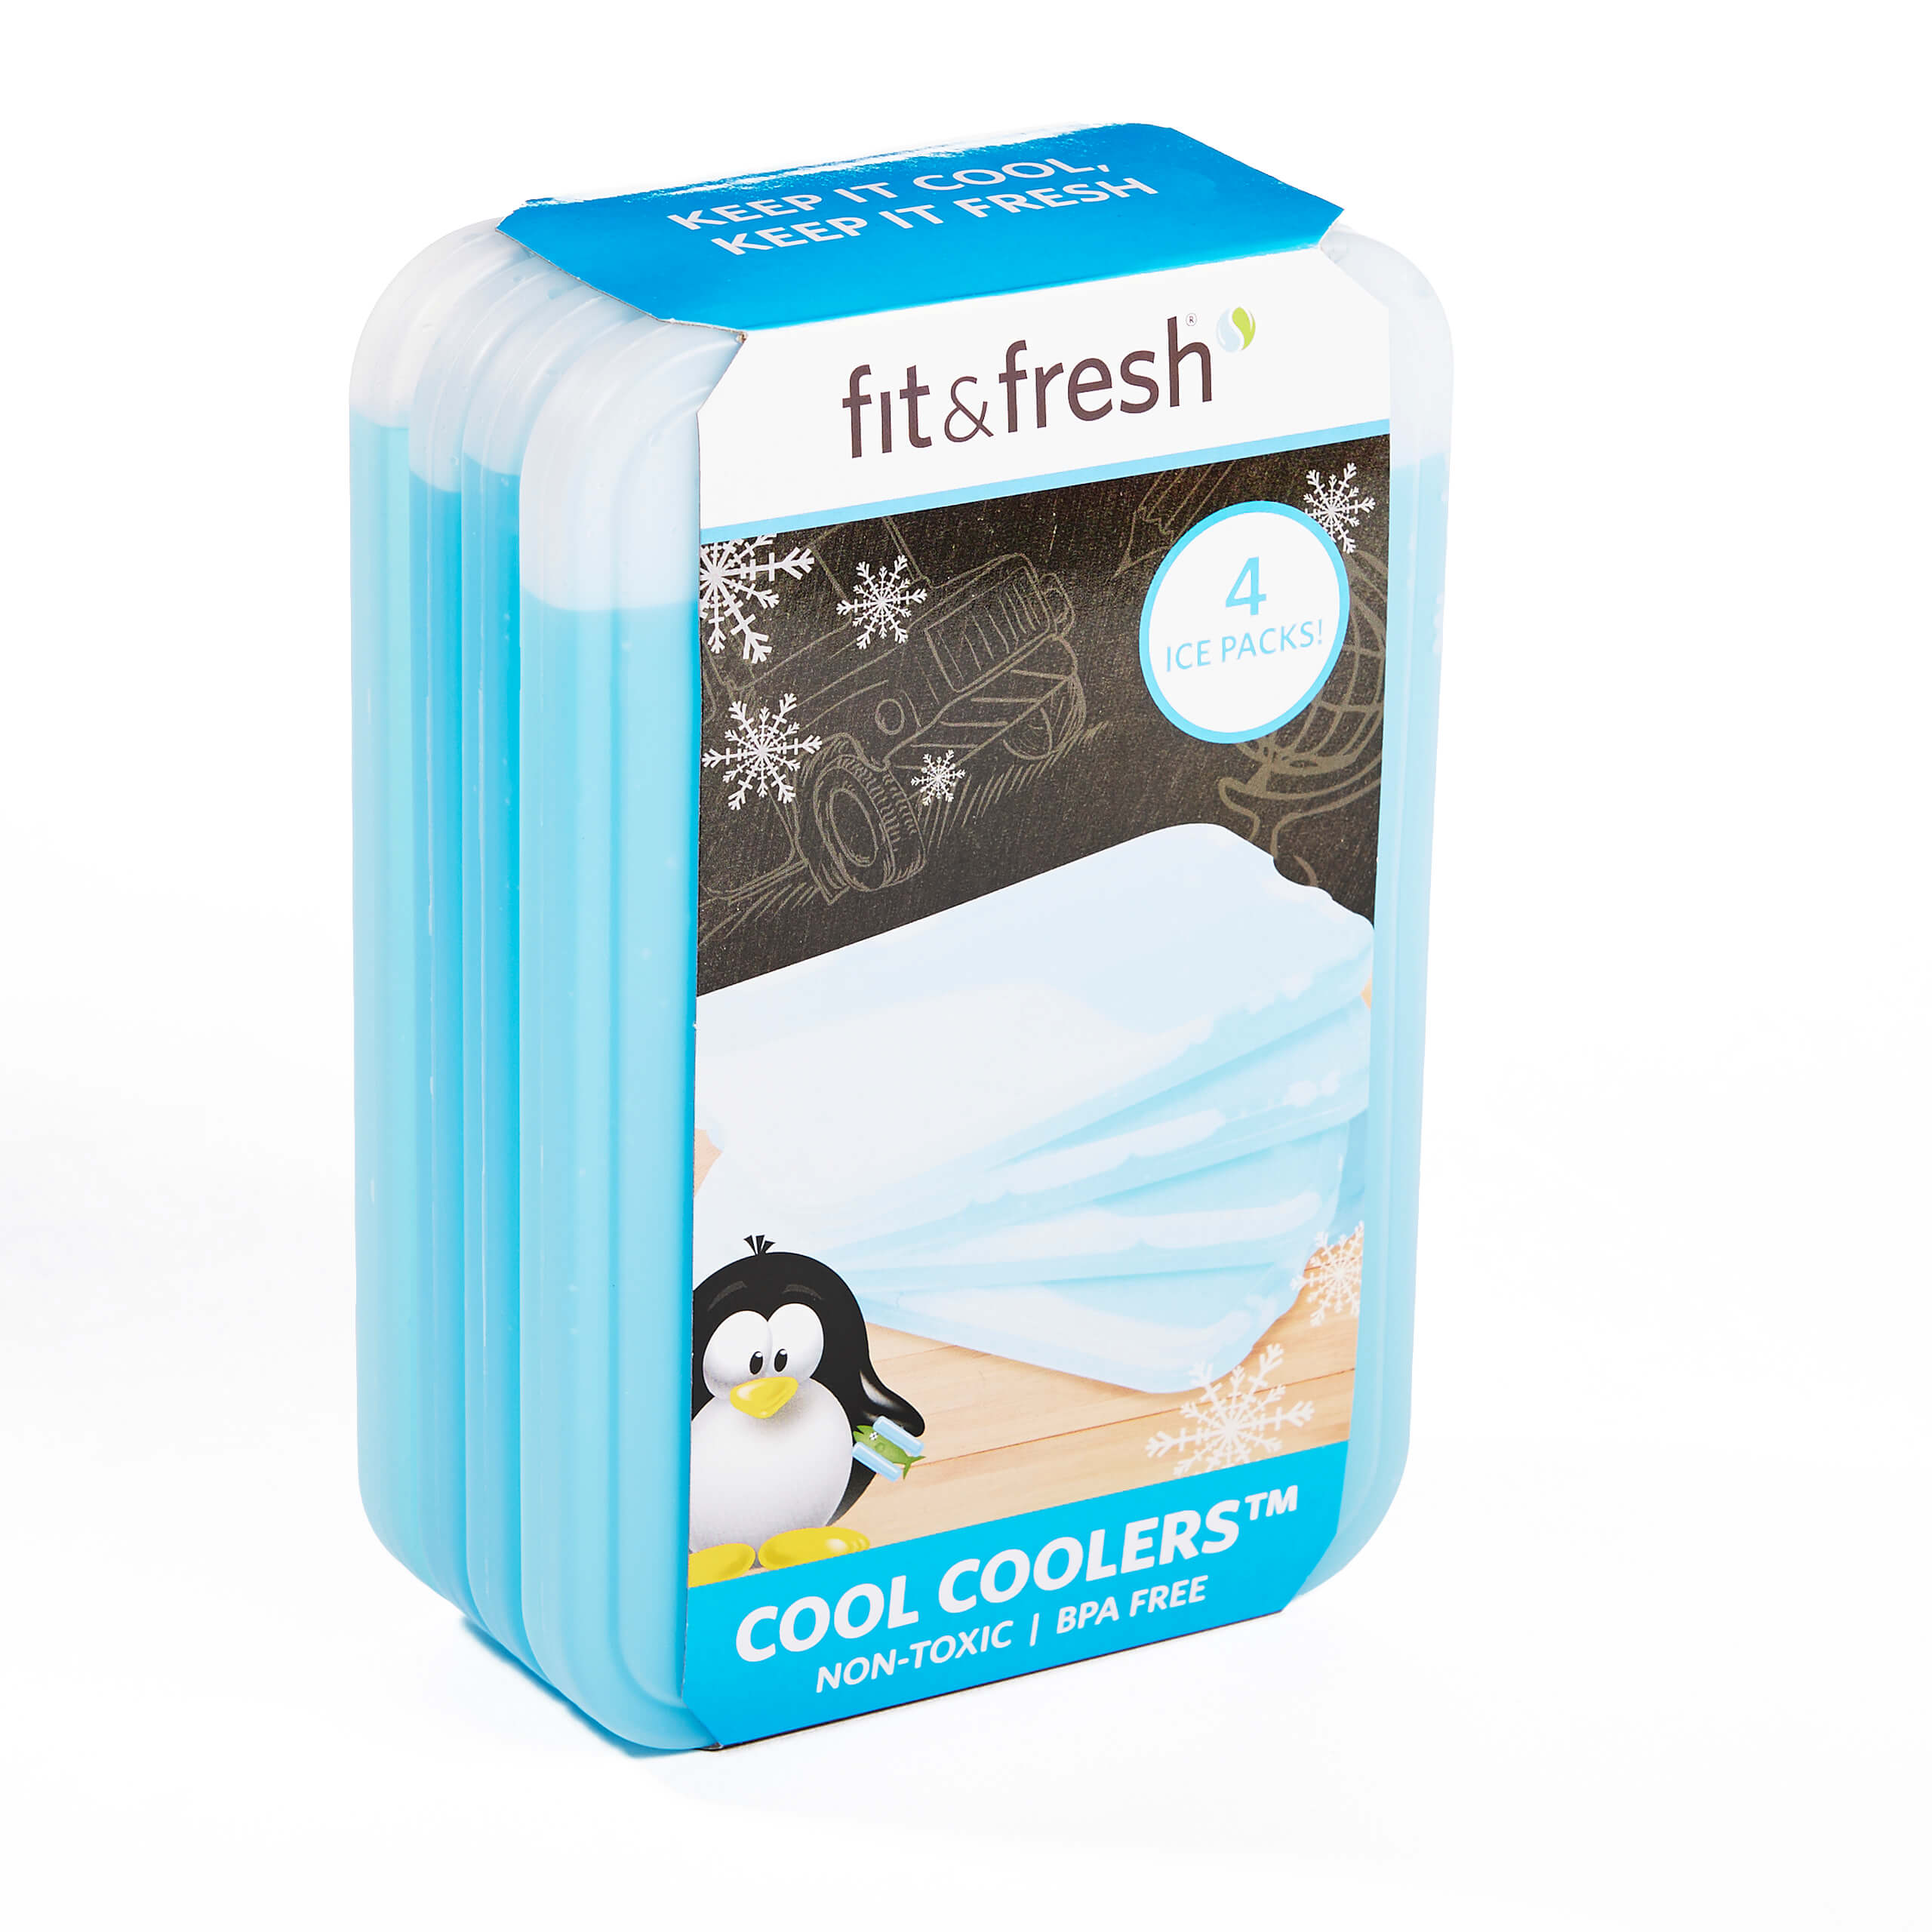 fit & fresh cool coolers ice packs